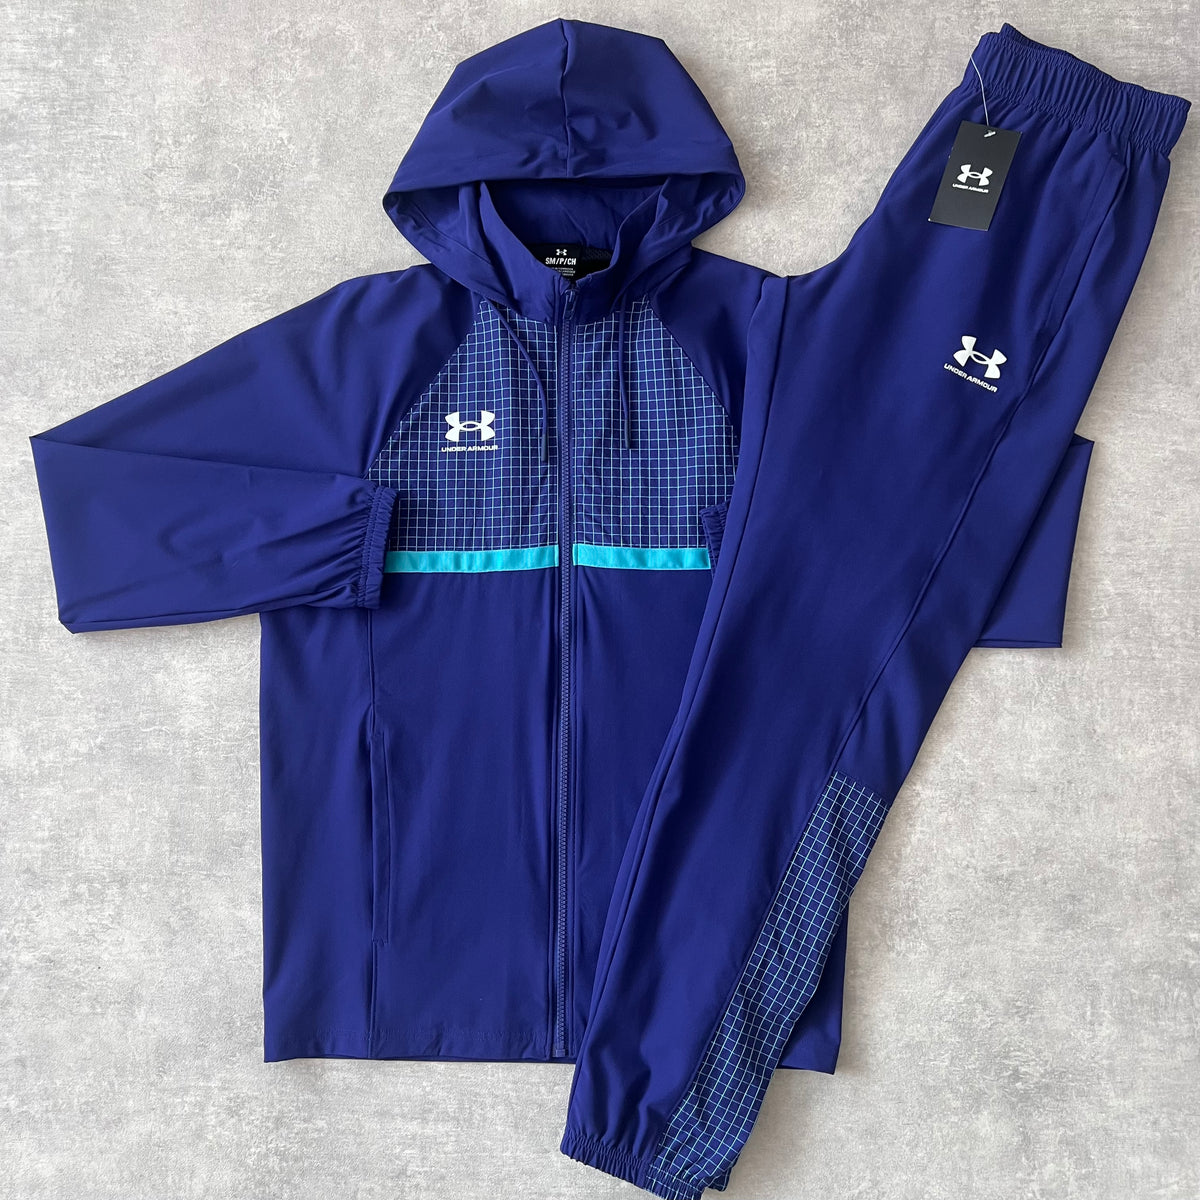 UNDER ARMOUR GRID TRACKSUIT BLUE - JACKET & TROUSERS